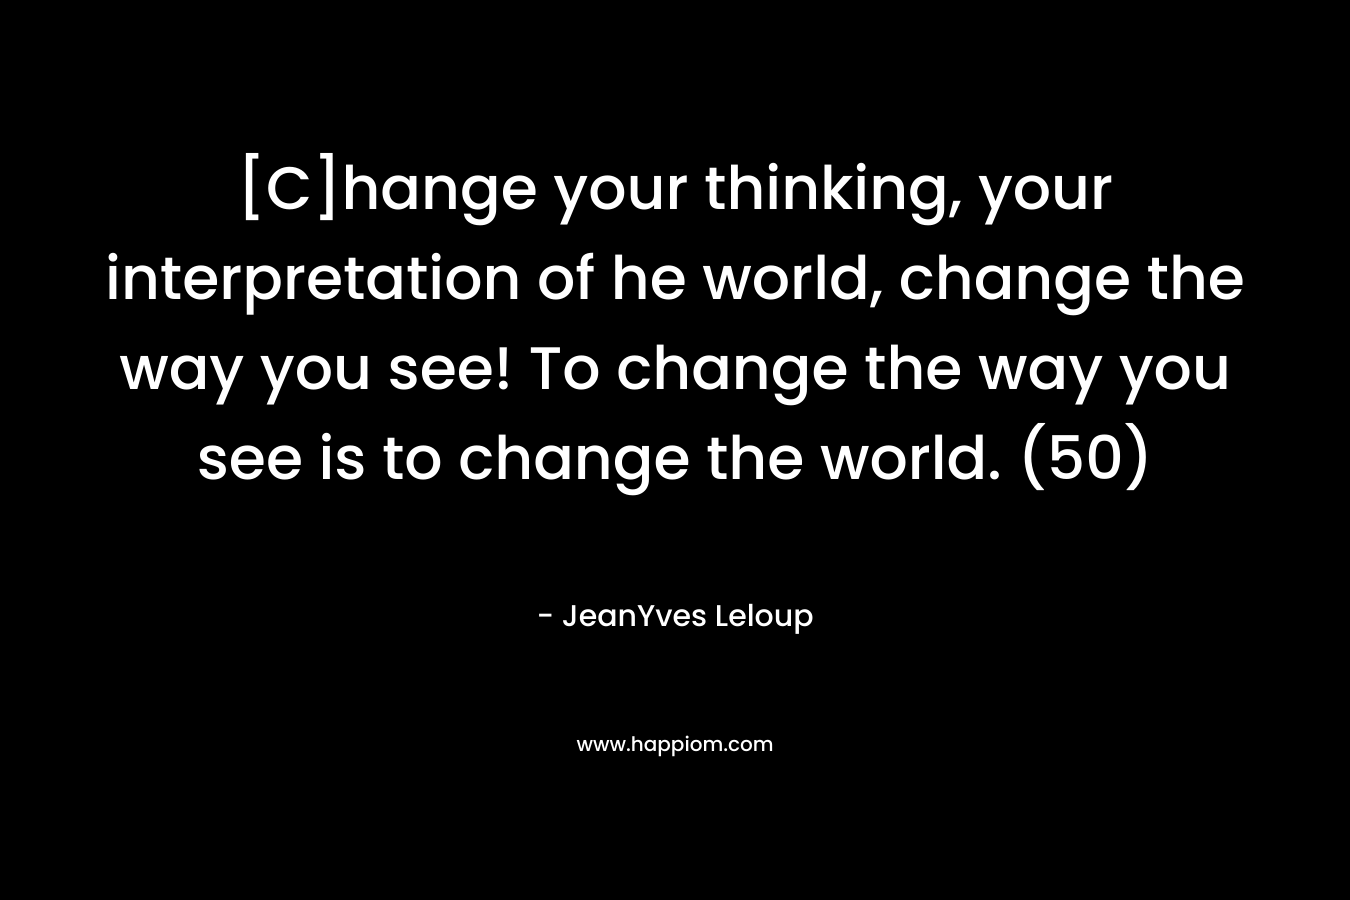 [C]hange your thinking, your interpretation of he world, change the way you see! To change the way you see is to change the world. (50)